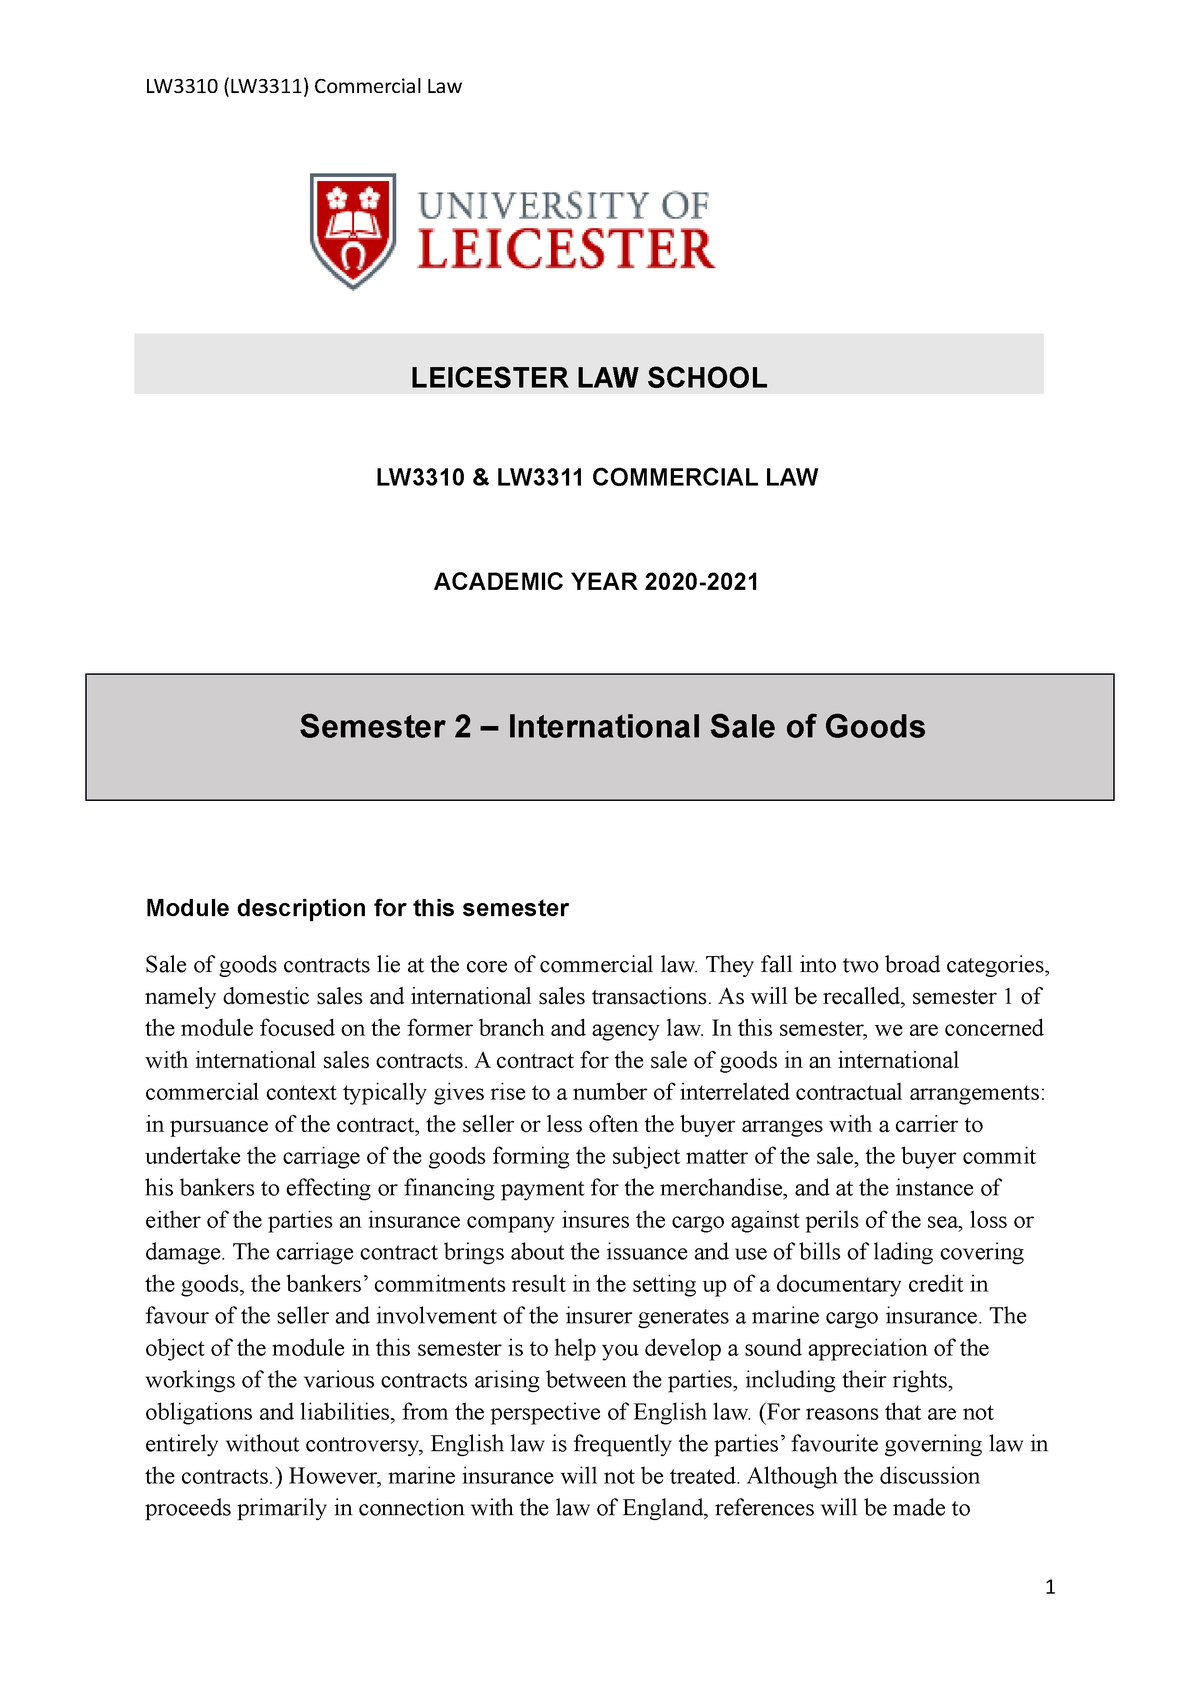 Com Law 2 (Handout) LEICESTER LAW SCHOOL LW3310 & LW3311 COMMERCIAL